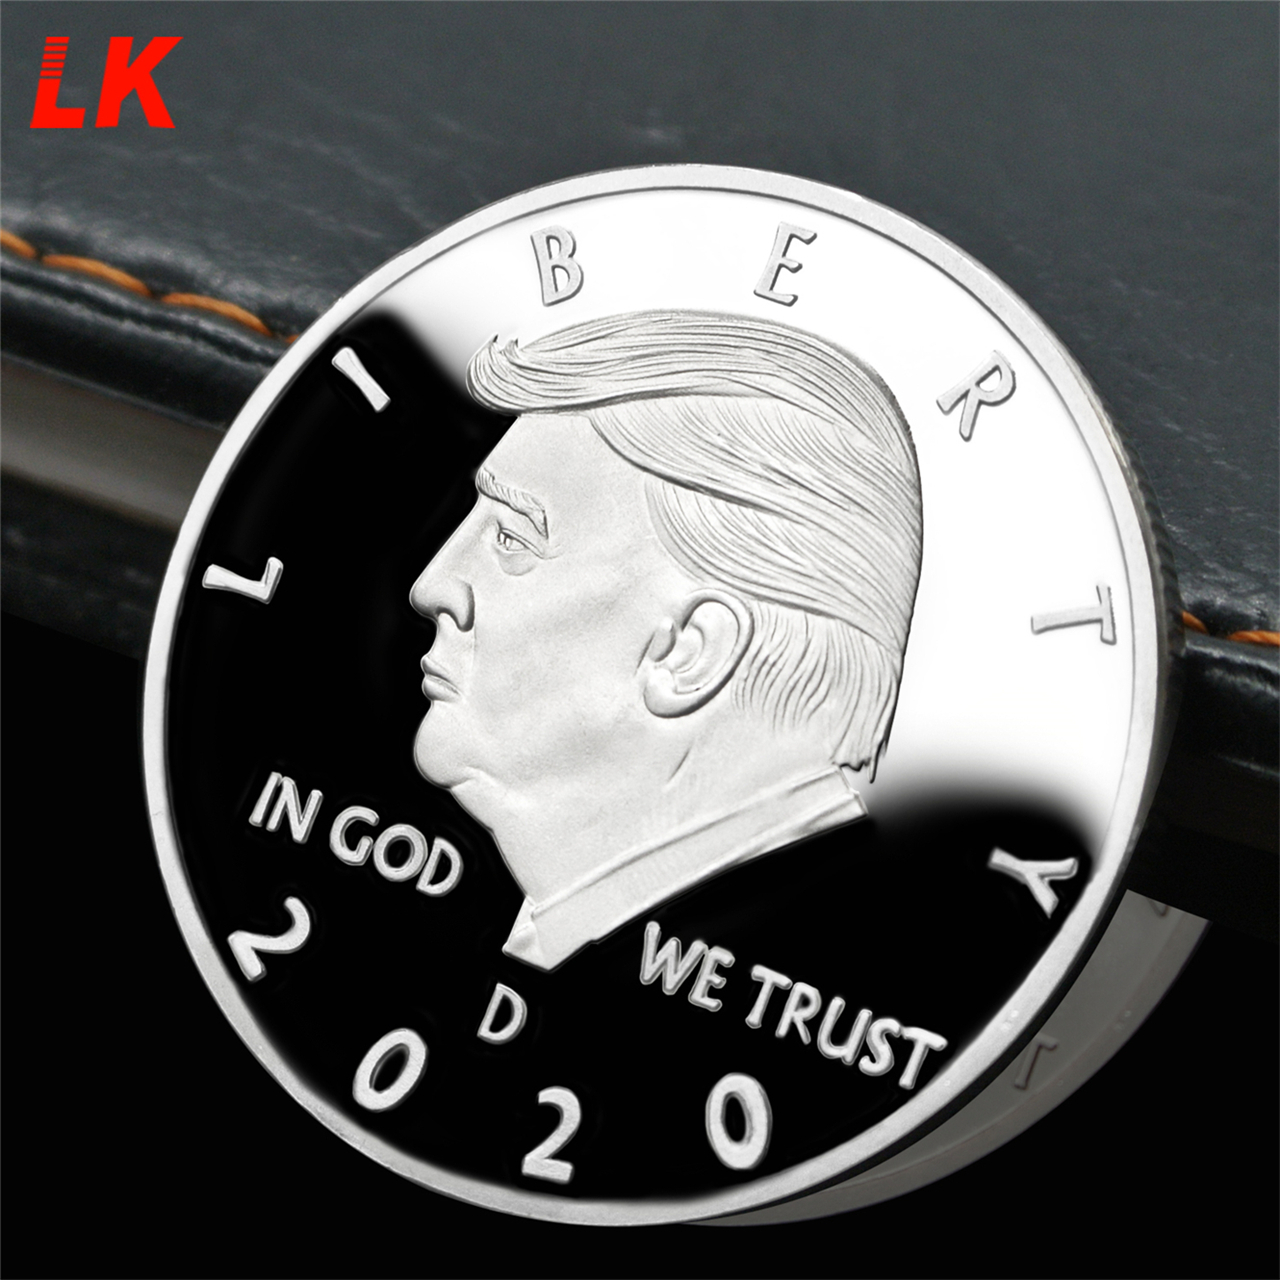 Donald Trump 2024 Challenge Coins, Keep America Great United States Presidential Re-Election Campaign Gold Plated Coin Token